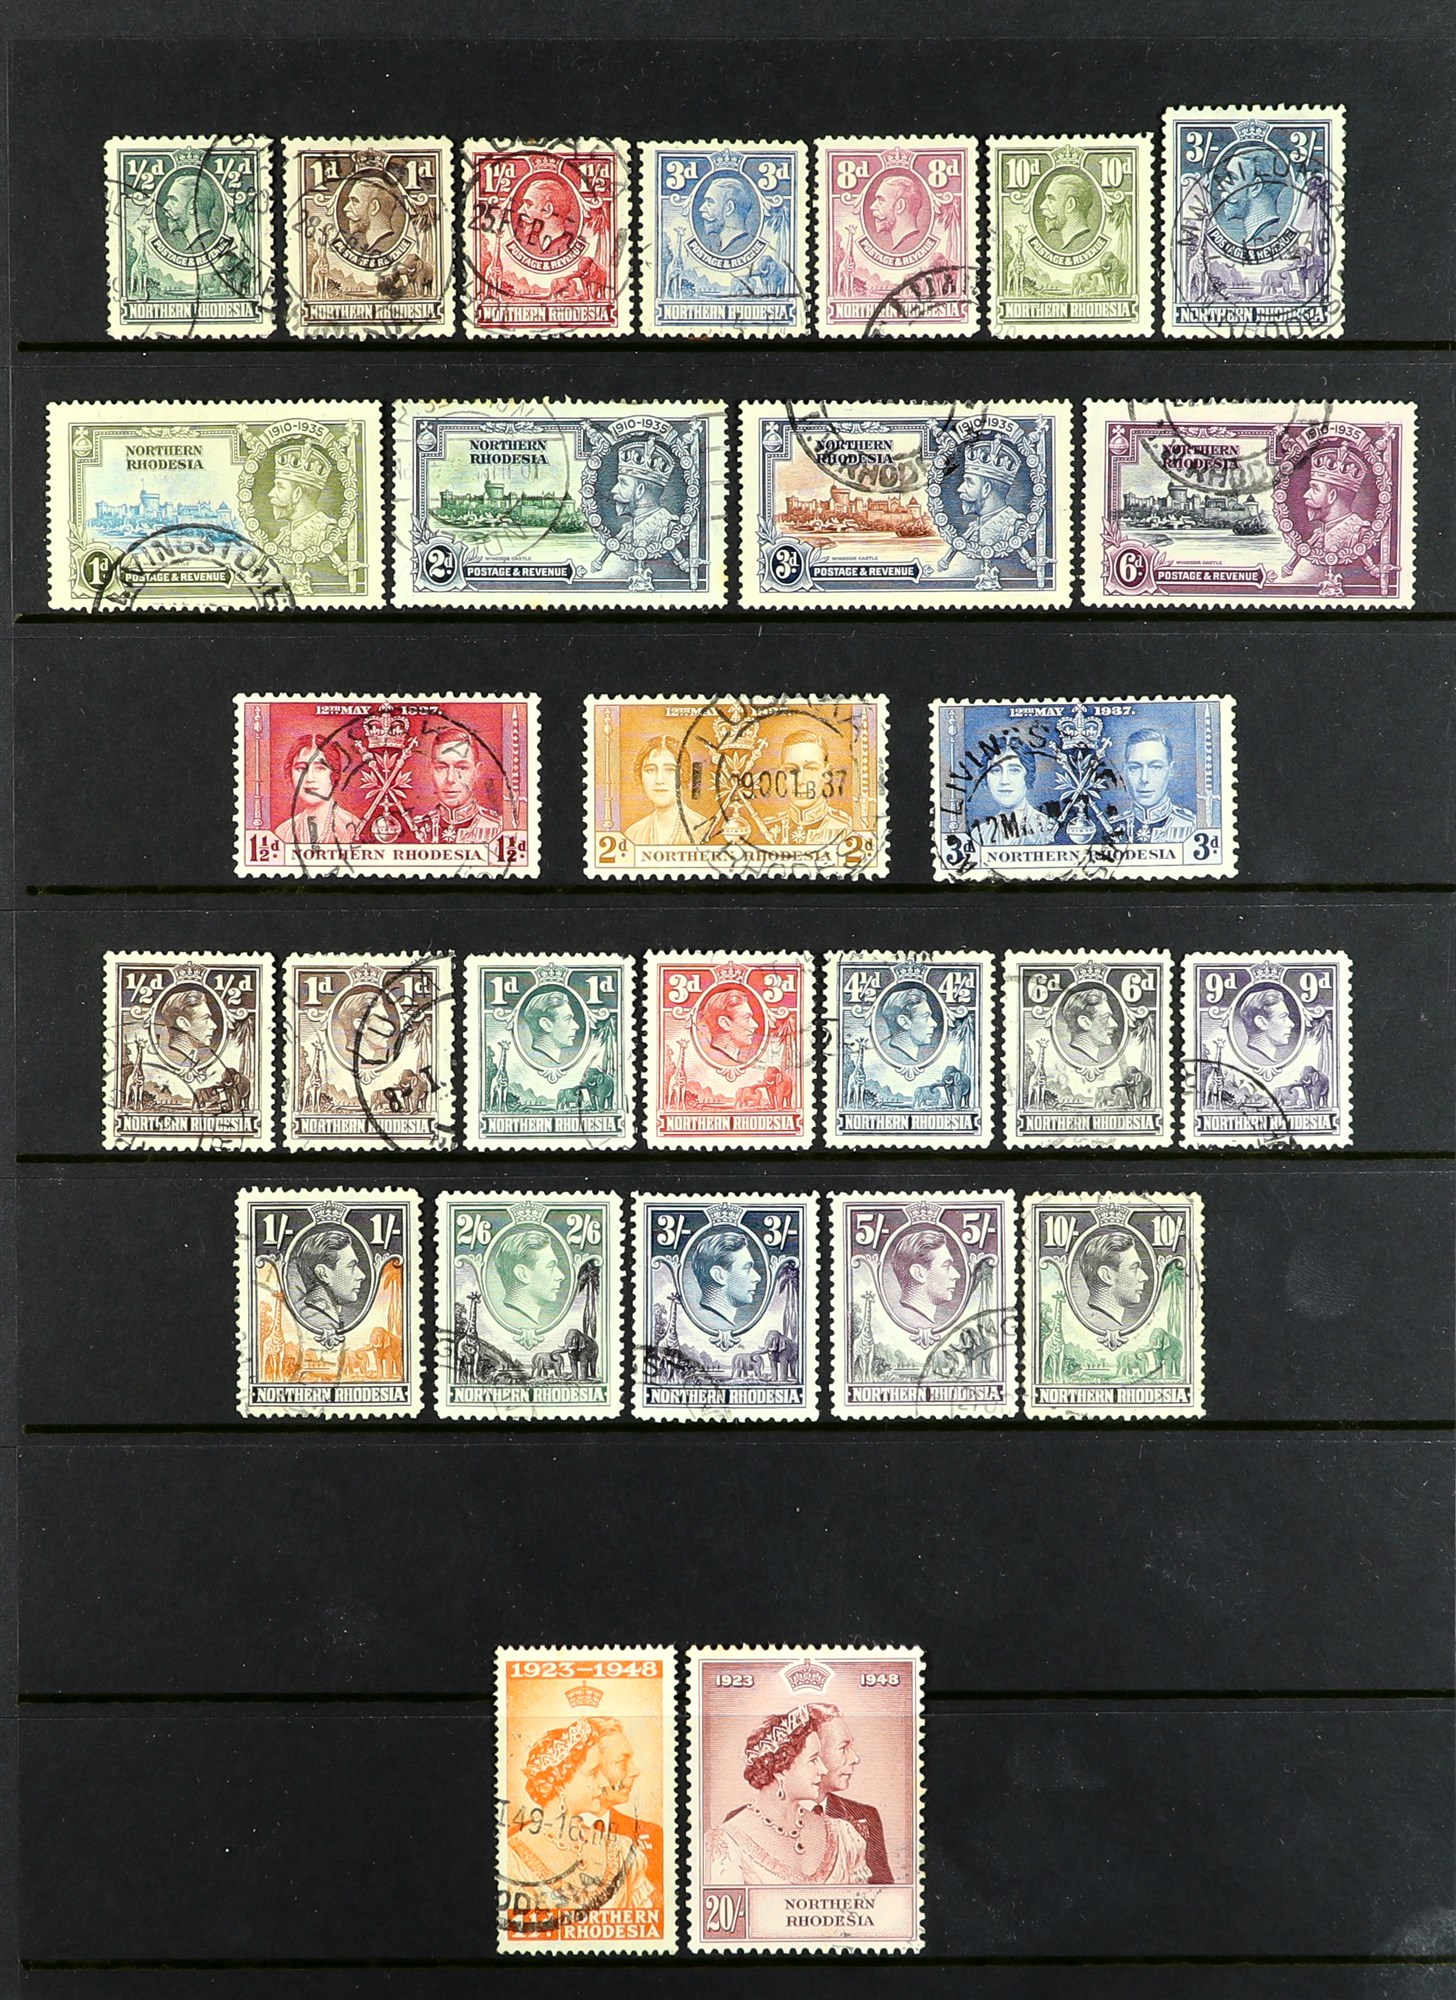 NORTHERN RHODESIA 1925 - 1948 USED COLLECTION of 28 stamps on protective pages incl. high values,